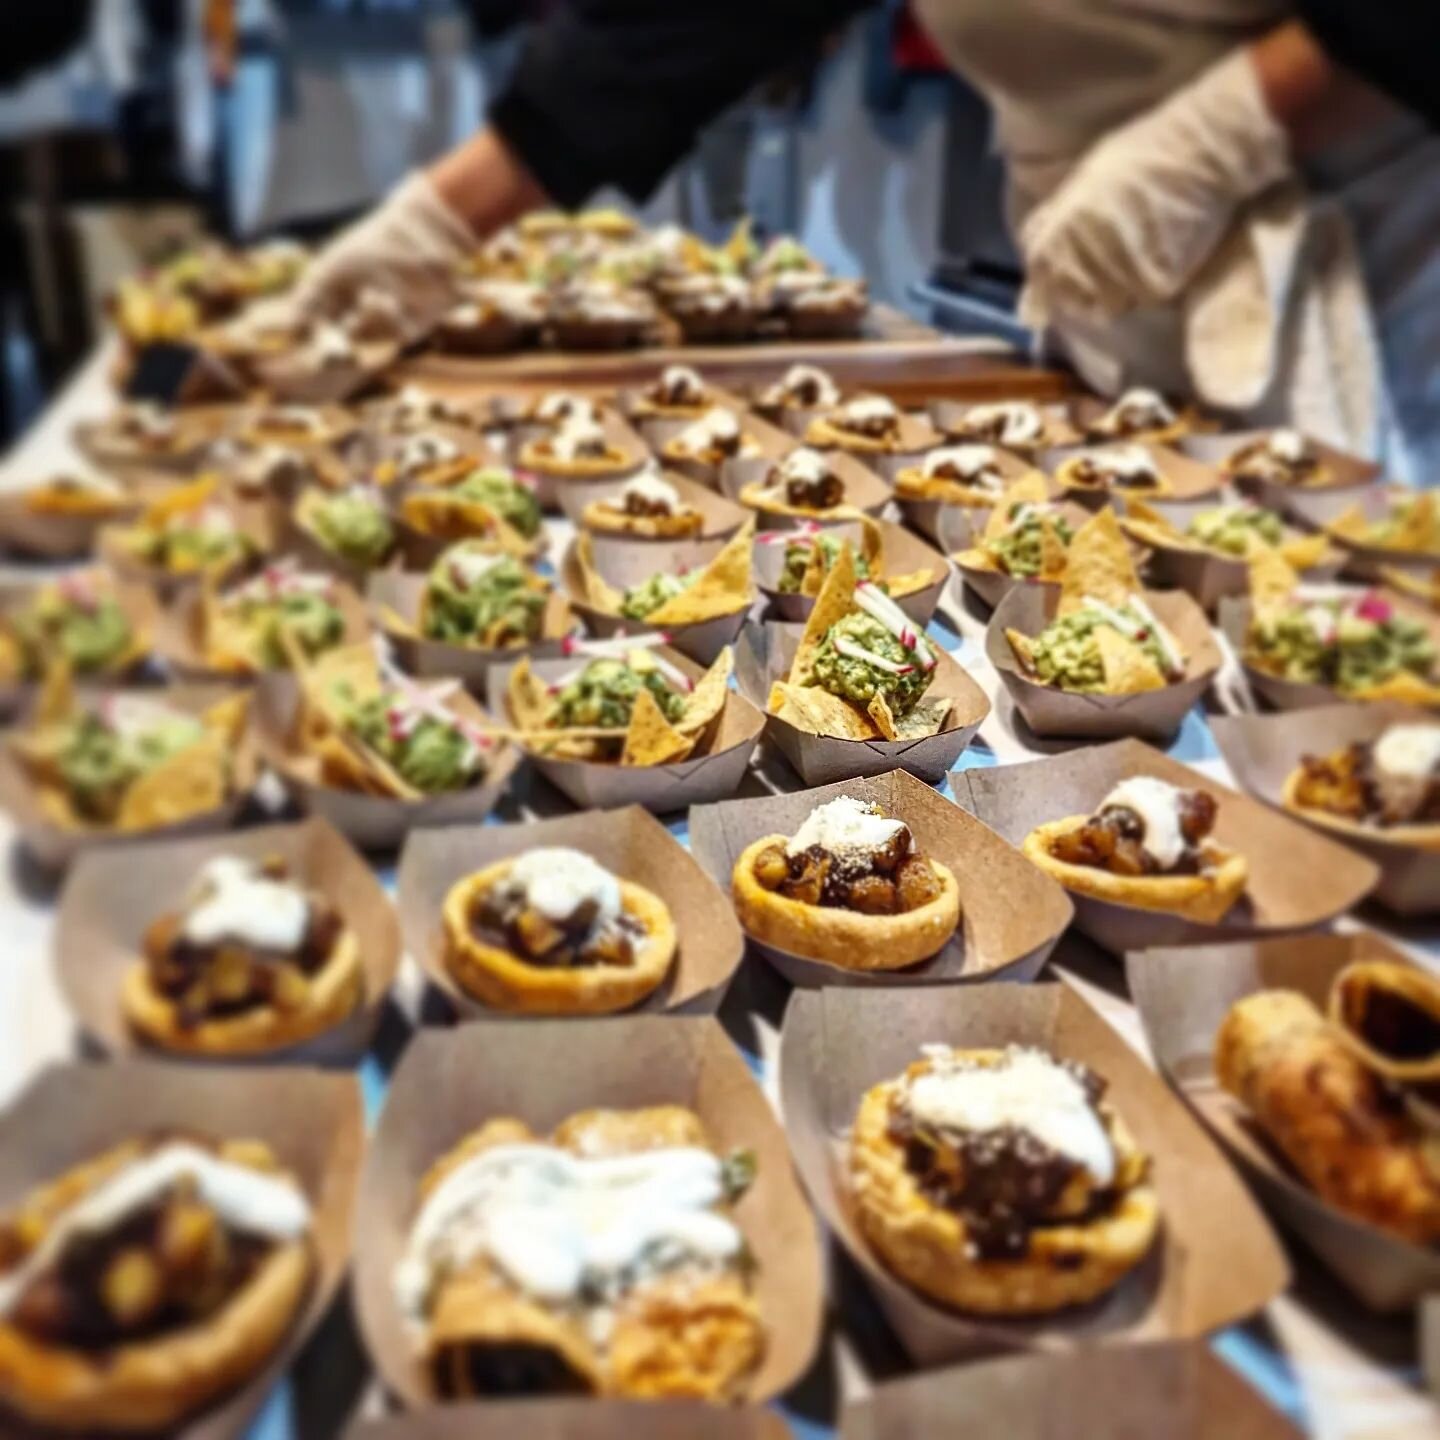 Wedding weekend #chicagowedding #chicagocatering  #catering #tamalespaceship #fallwedding #foodporn #mexicanstreetfood #mexicanfood #sopes #guacamole #taquitos